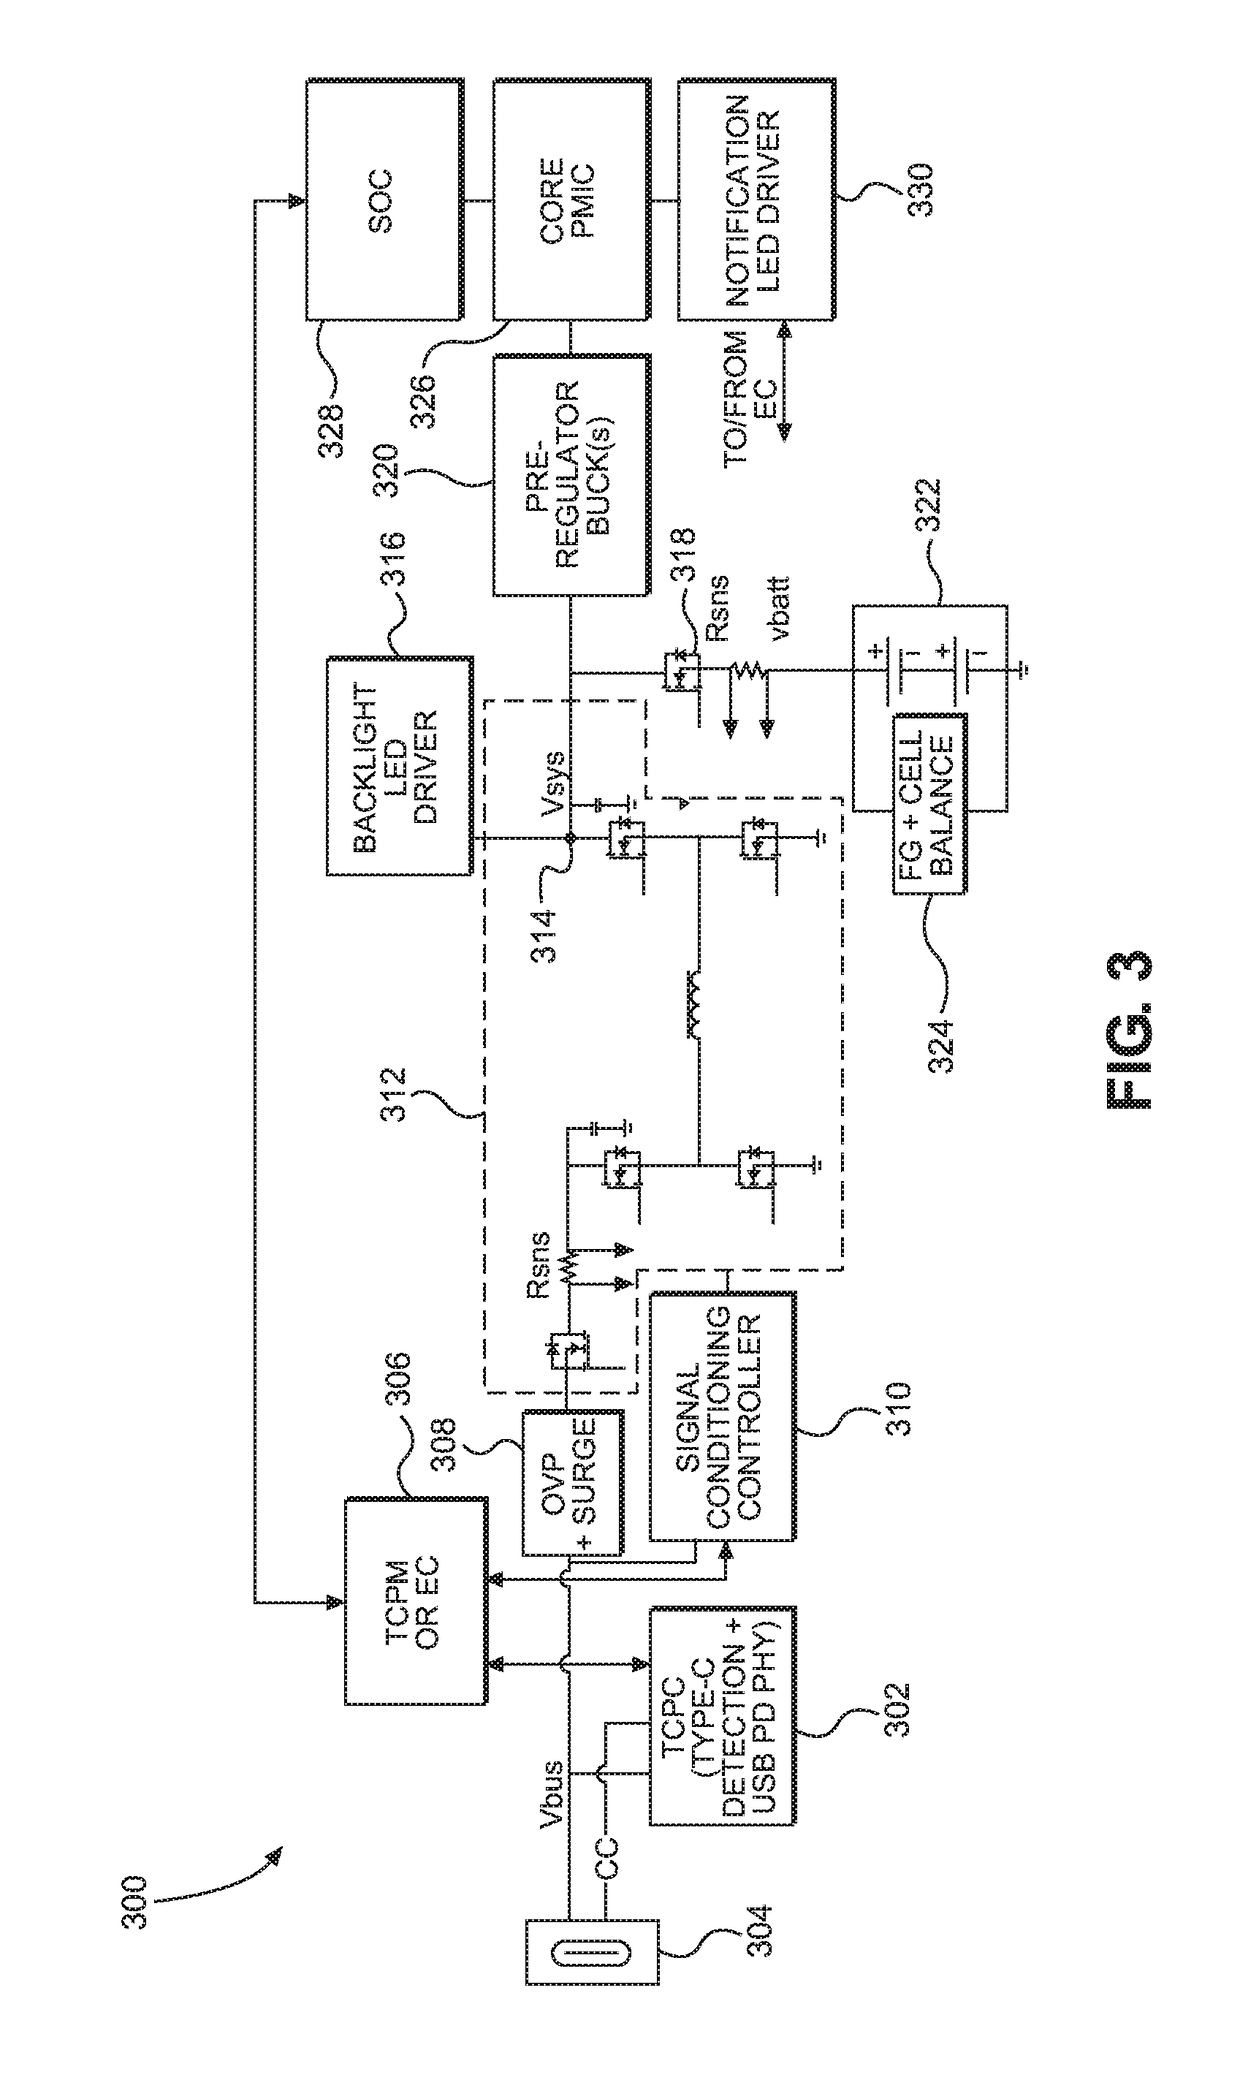 Universal serial bus (USB) type-c and power delivery port with scalable power architecture